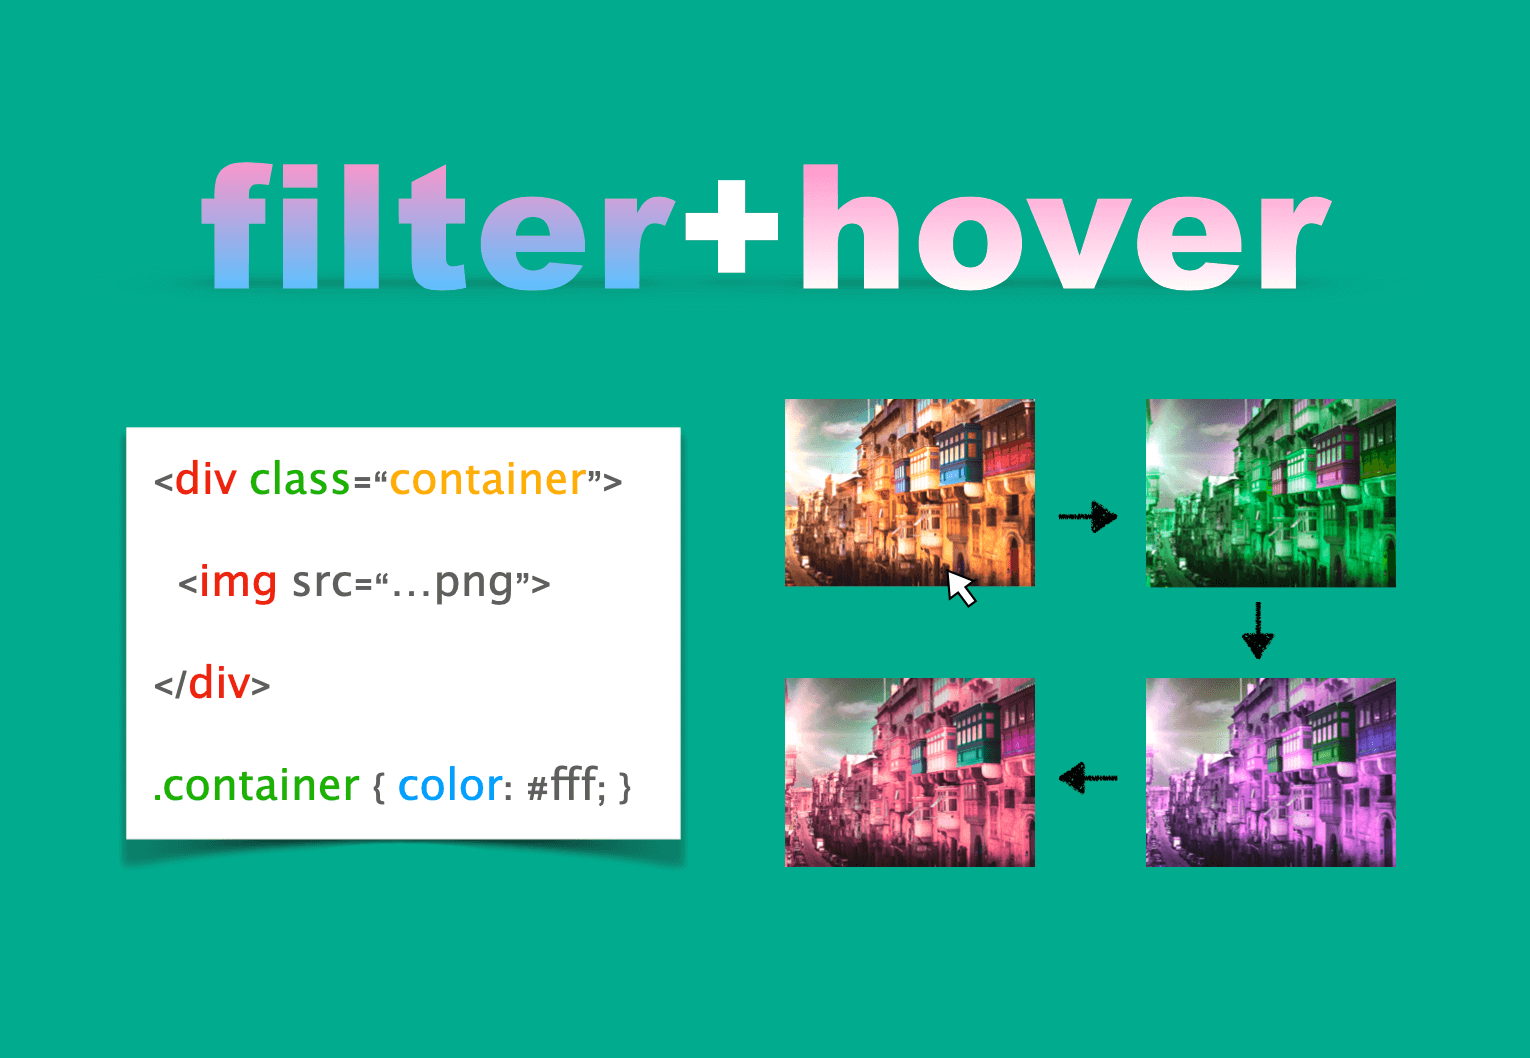 hover-animation-filters-transition.png